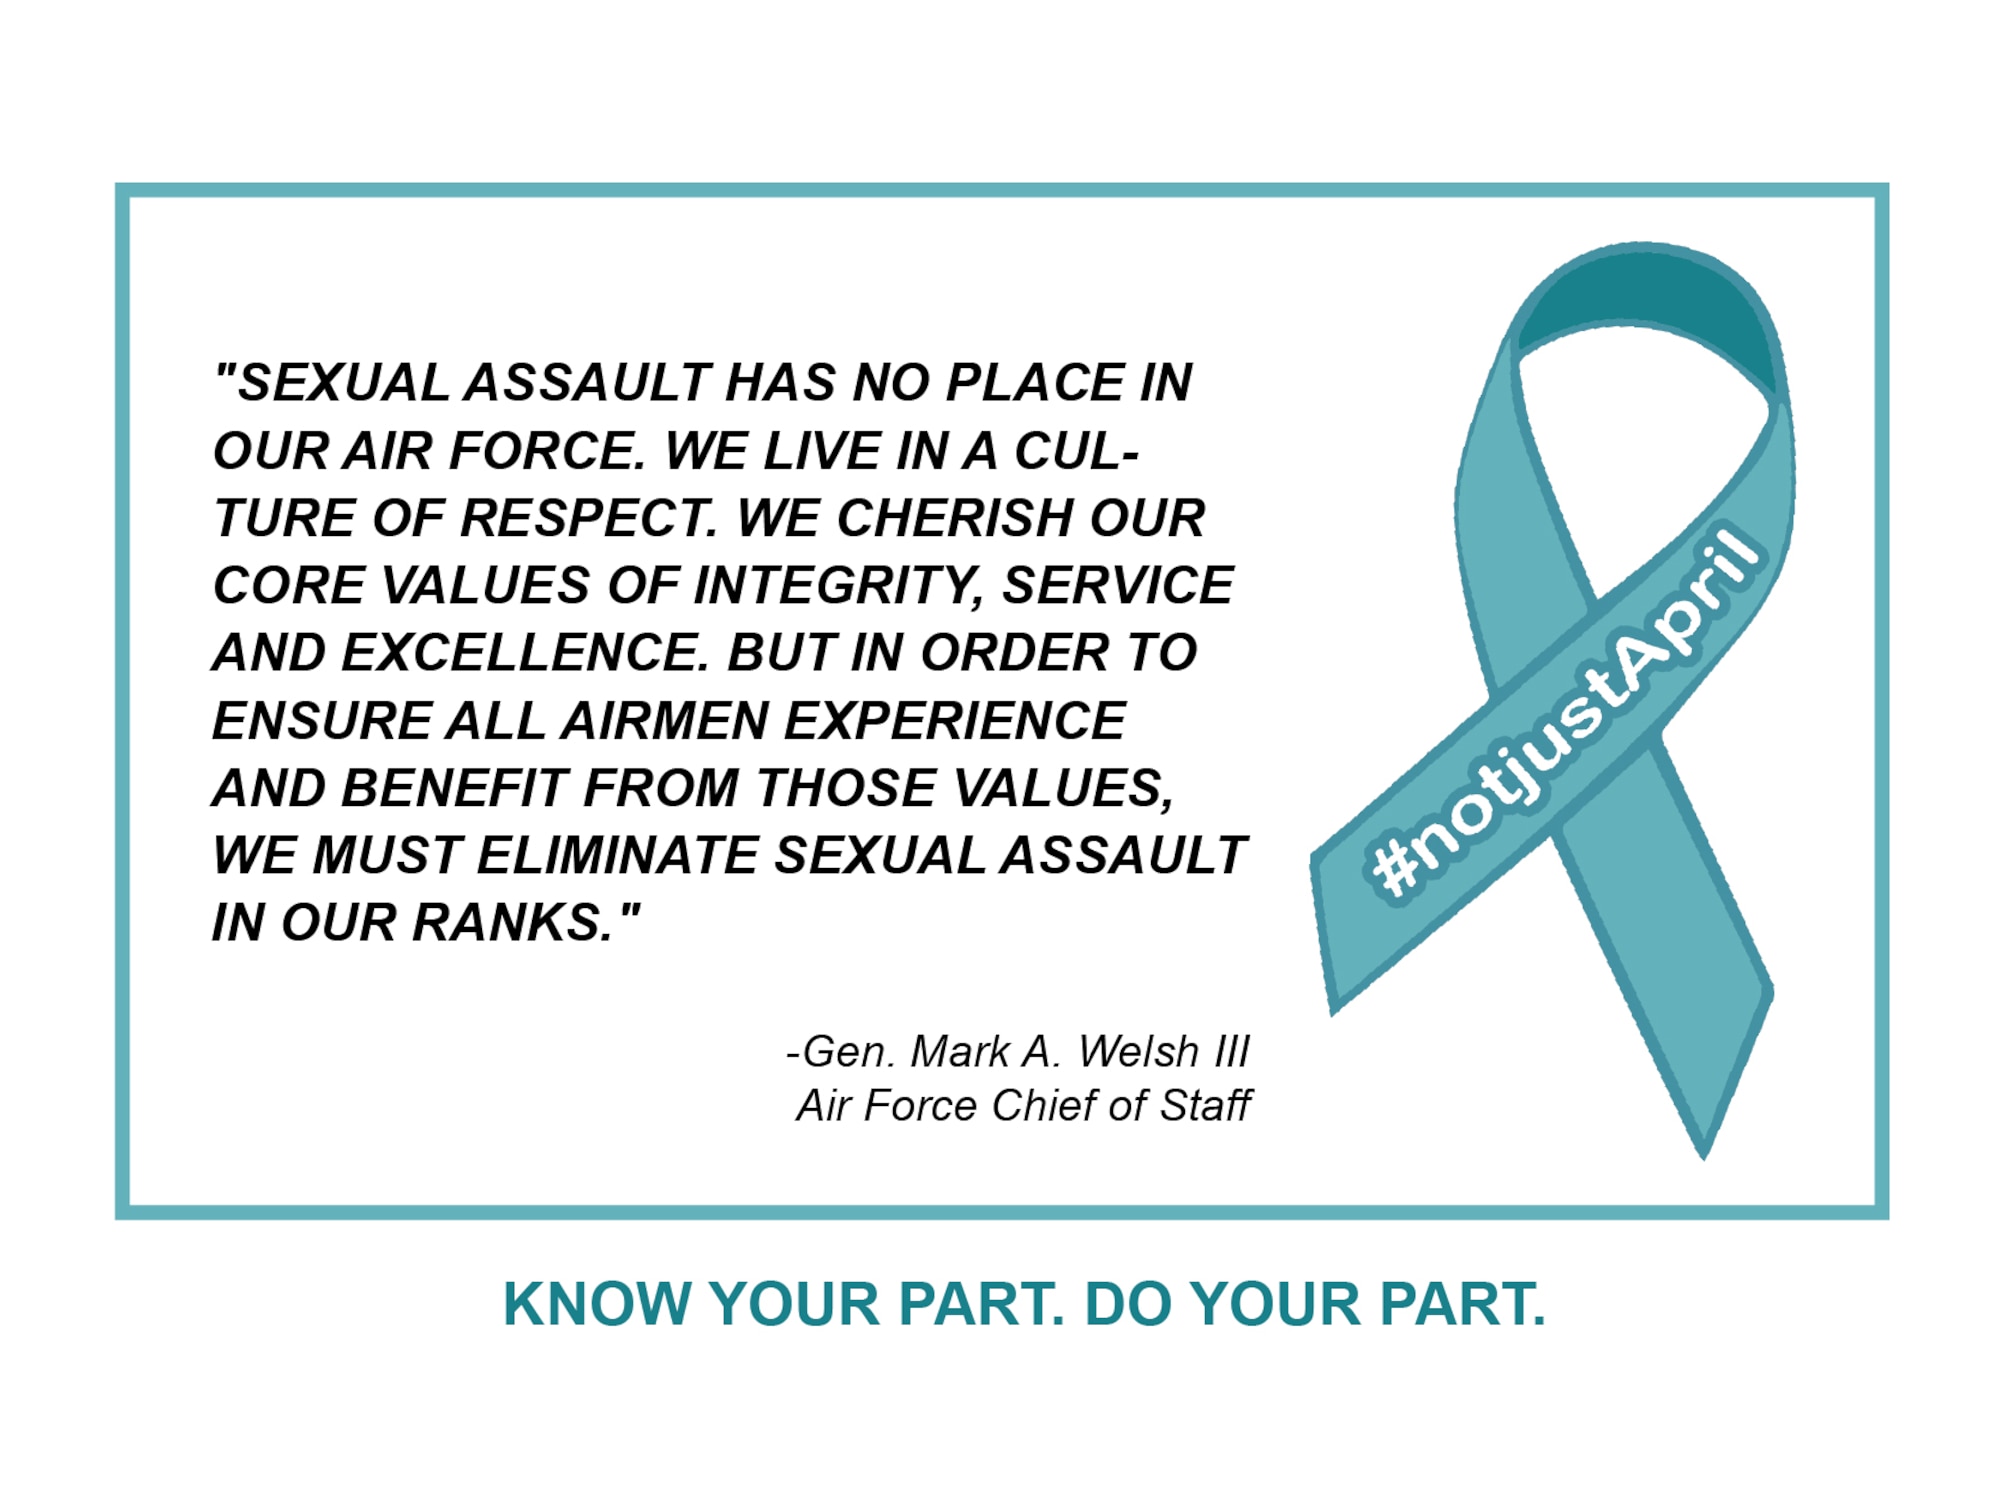 "Sexual assault has no place in our Air Force. We live in a culture of respect. We cherish our coure values of integrity, service and excellence. But in order to ensure all Airmen experience and benefit from those values, we must eliminate sexual assault in our ranks." - Gen. Mark A. Welsh III, Air Force Chief of Staff